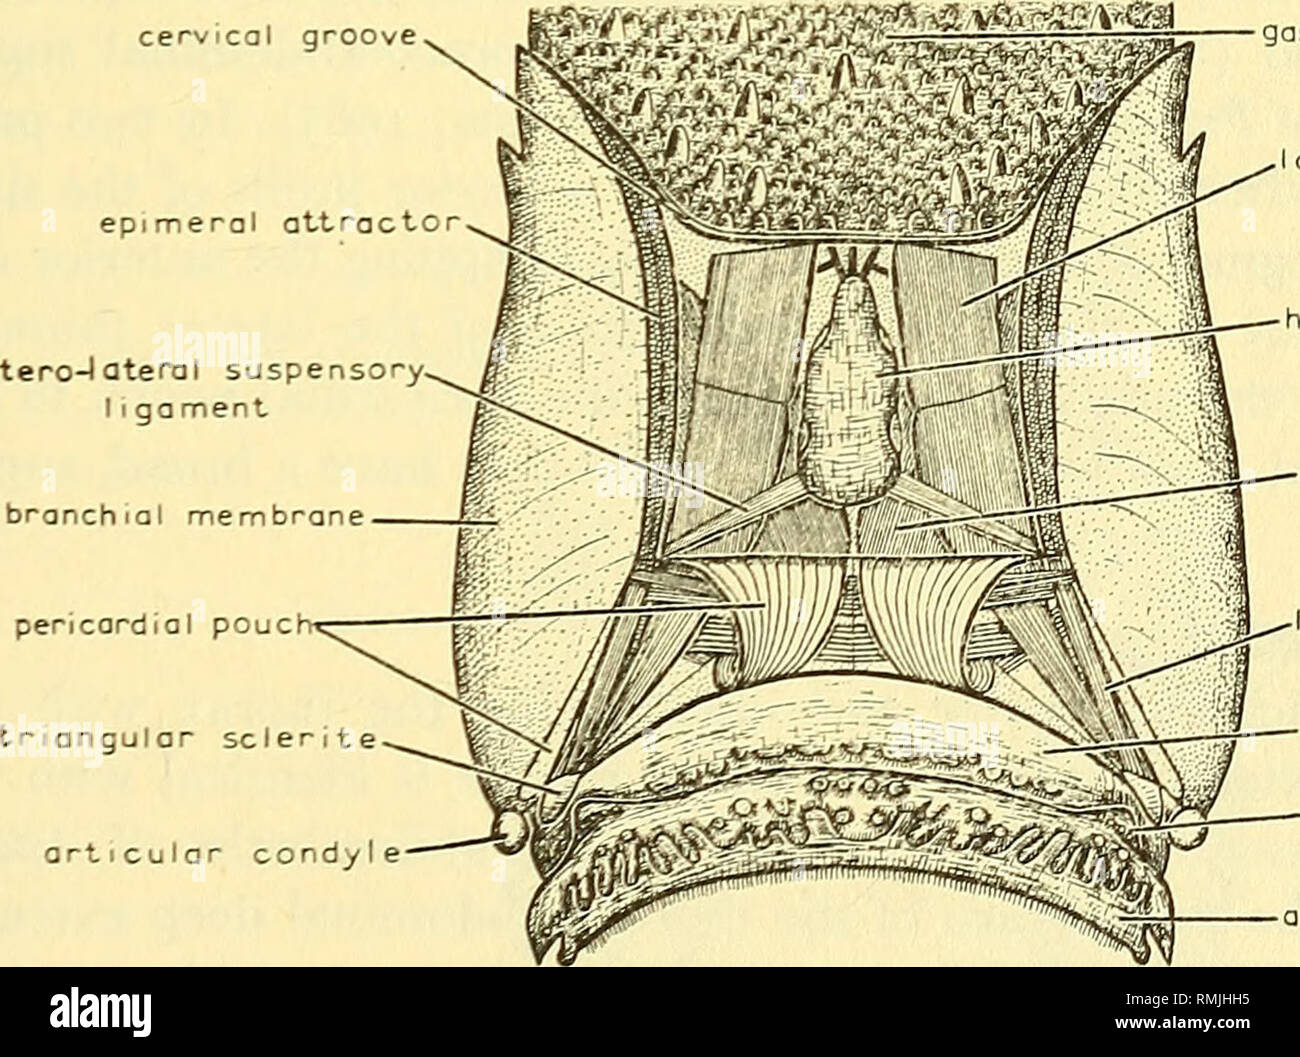 . Annals of the South African Museum = Annale van die Suid-Afrikaanse Museum. Natural history. THE ANATOMY OF THE CAPE ROCK LOBSTER 47 lateral end of the cervical groove, where it terminates approximately at the level of the anterior mandibular apodeme. All the fibres are attached to the carapace and are inserted on the inner, dorsal margin of the epimeral plates opposite the upper limit of the lining of the branchiostegite. The whole strip is clearly divisible into an outer or lateral series of short fibres and an inner row of somewhat longer, more medial fibres and, as the latter is interrup Stock Photo